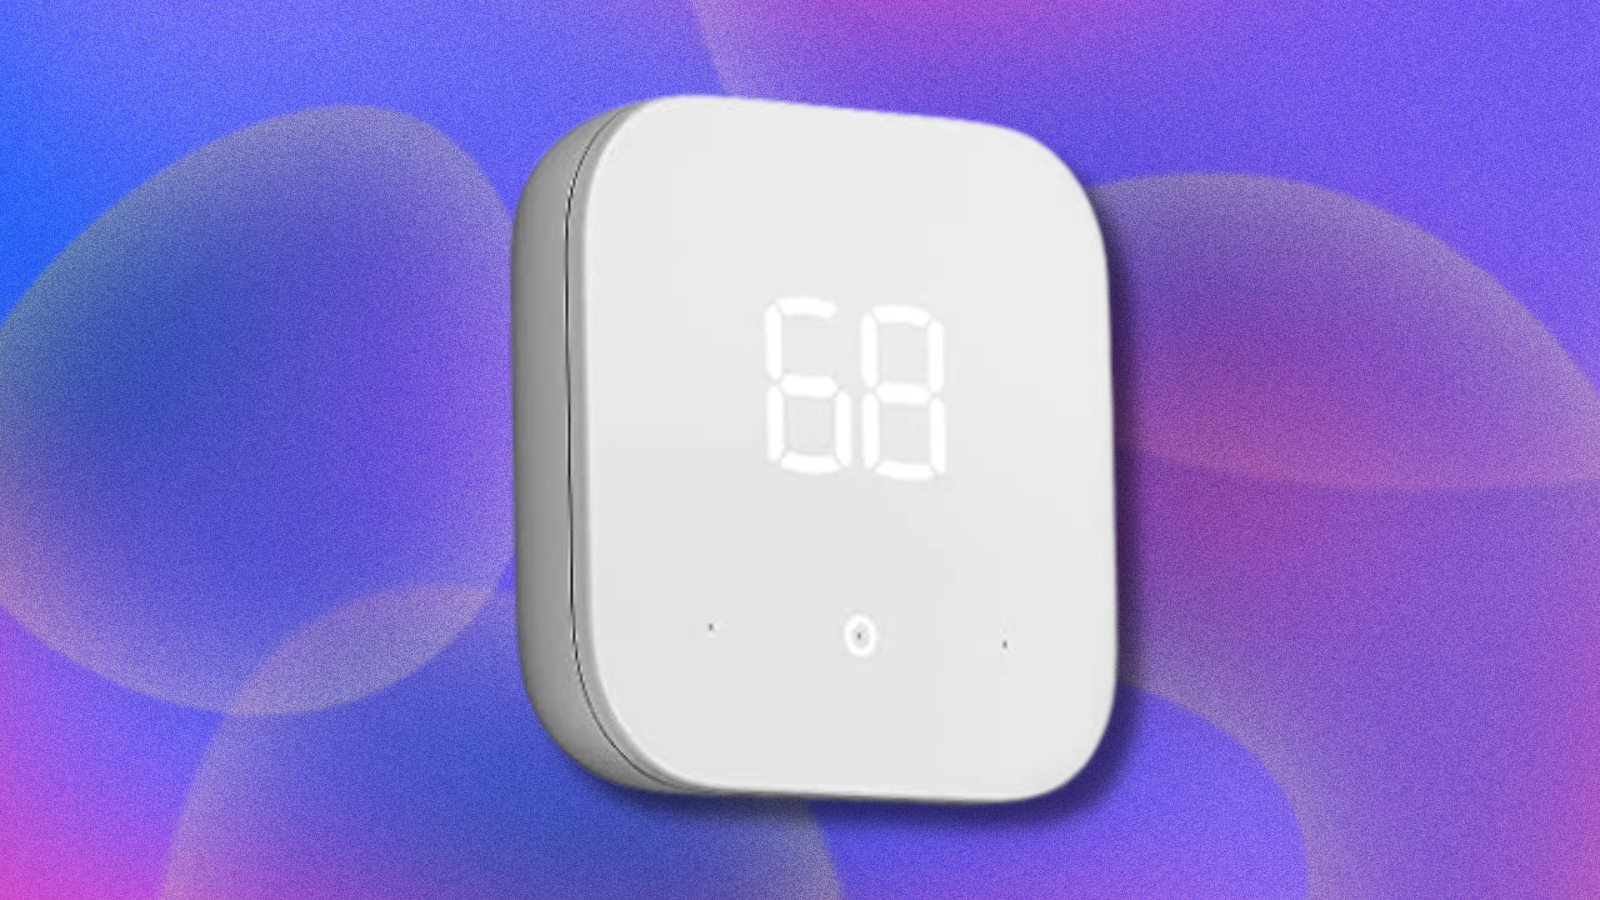 Amazon Smart Thermostat on purple and blue abstract background